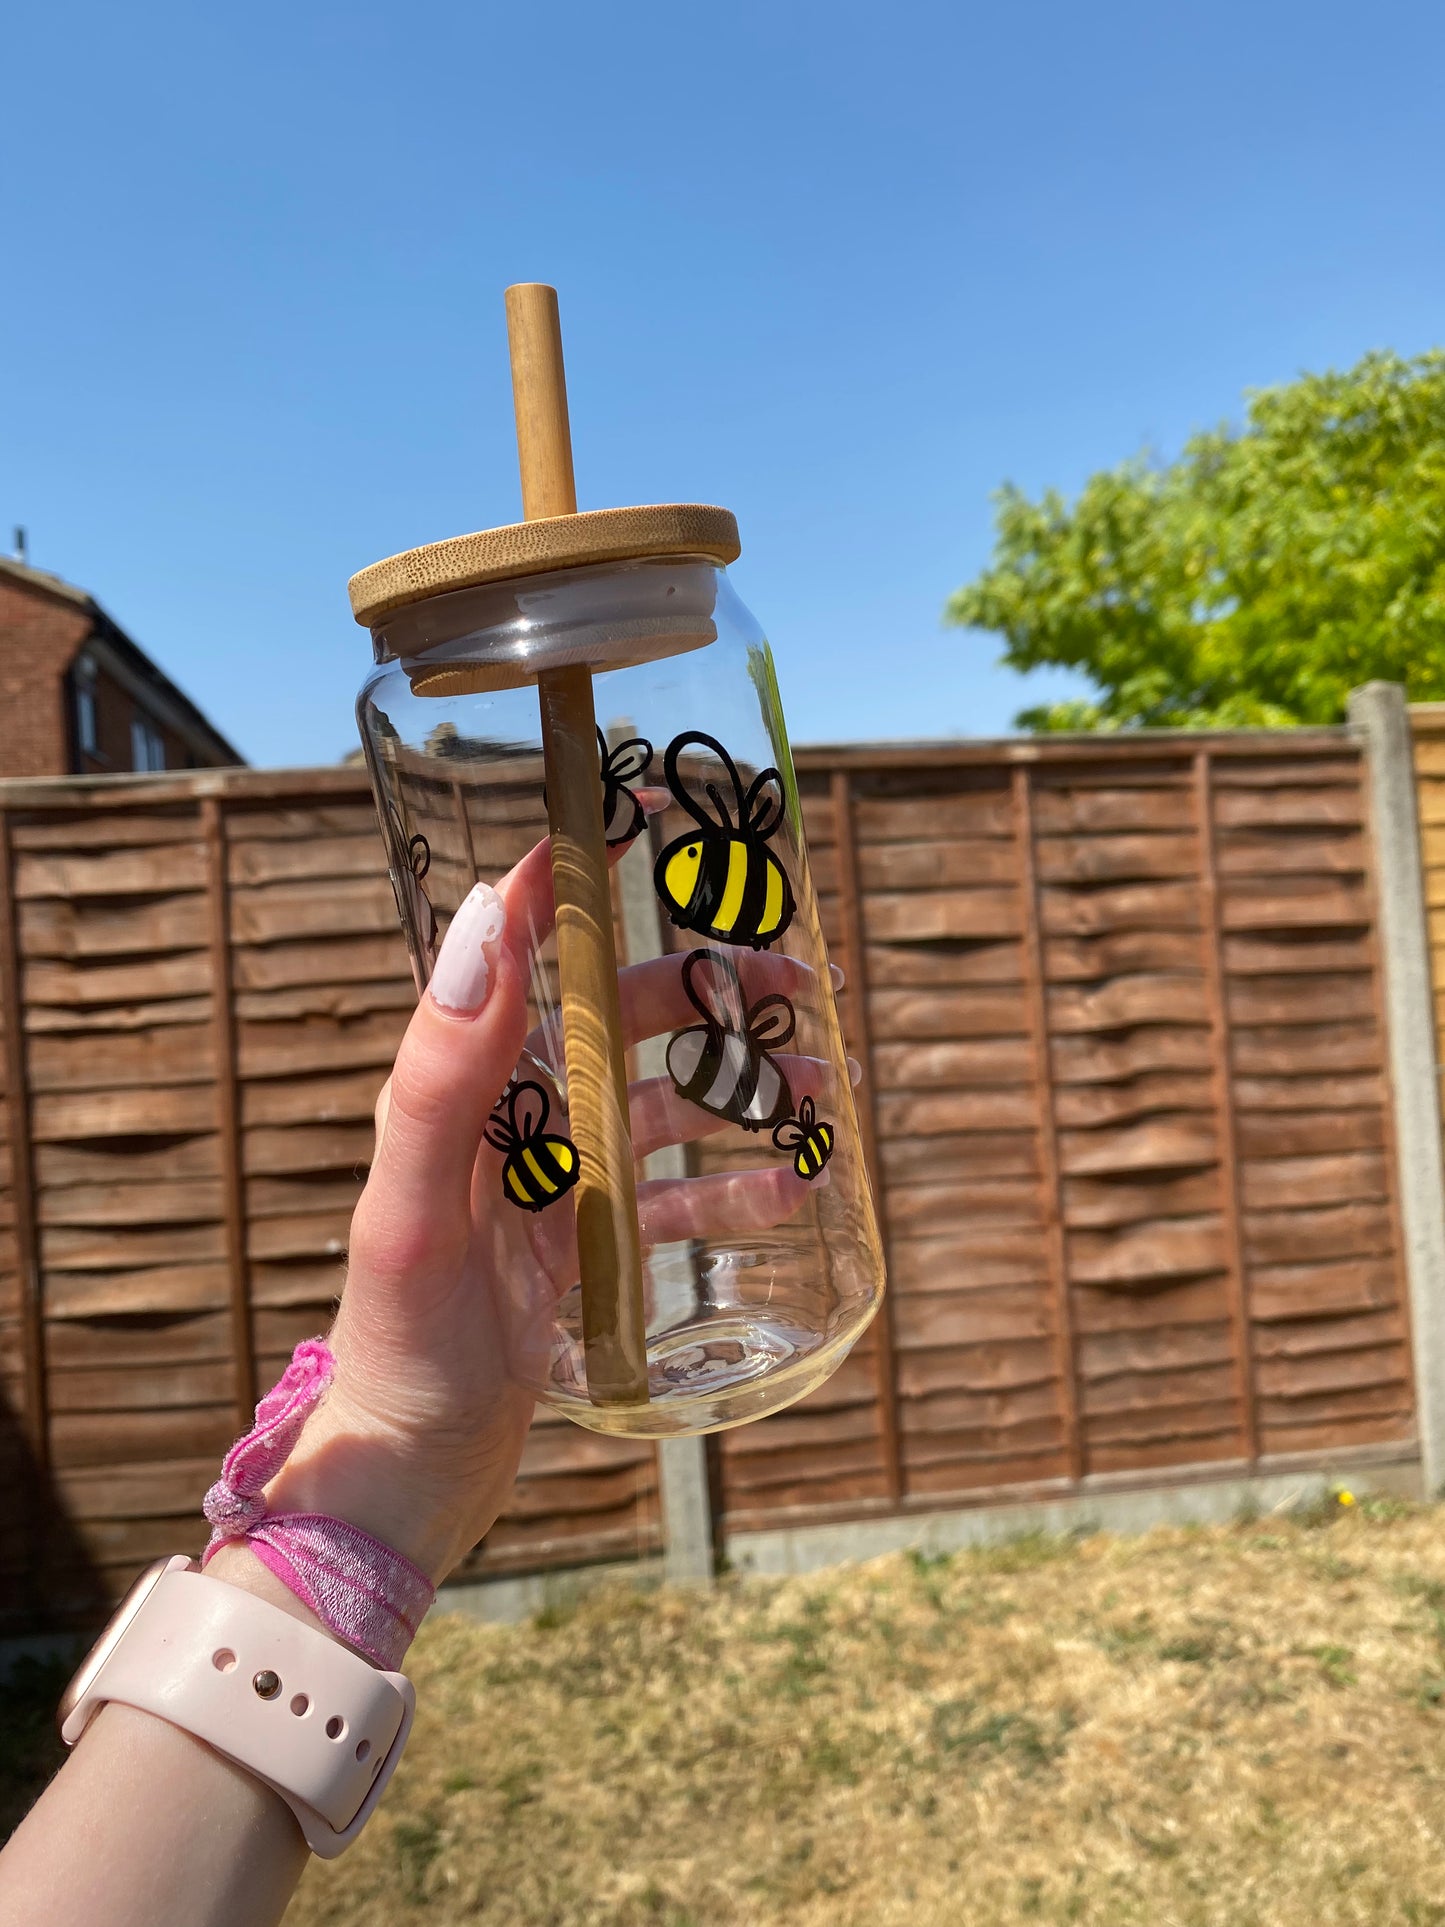 Bee glass can